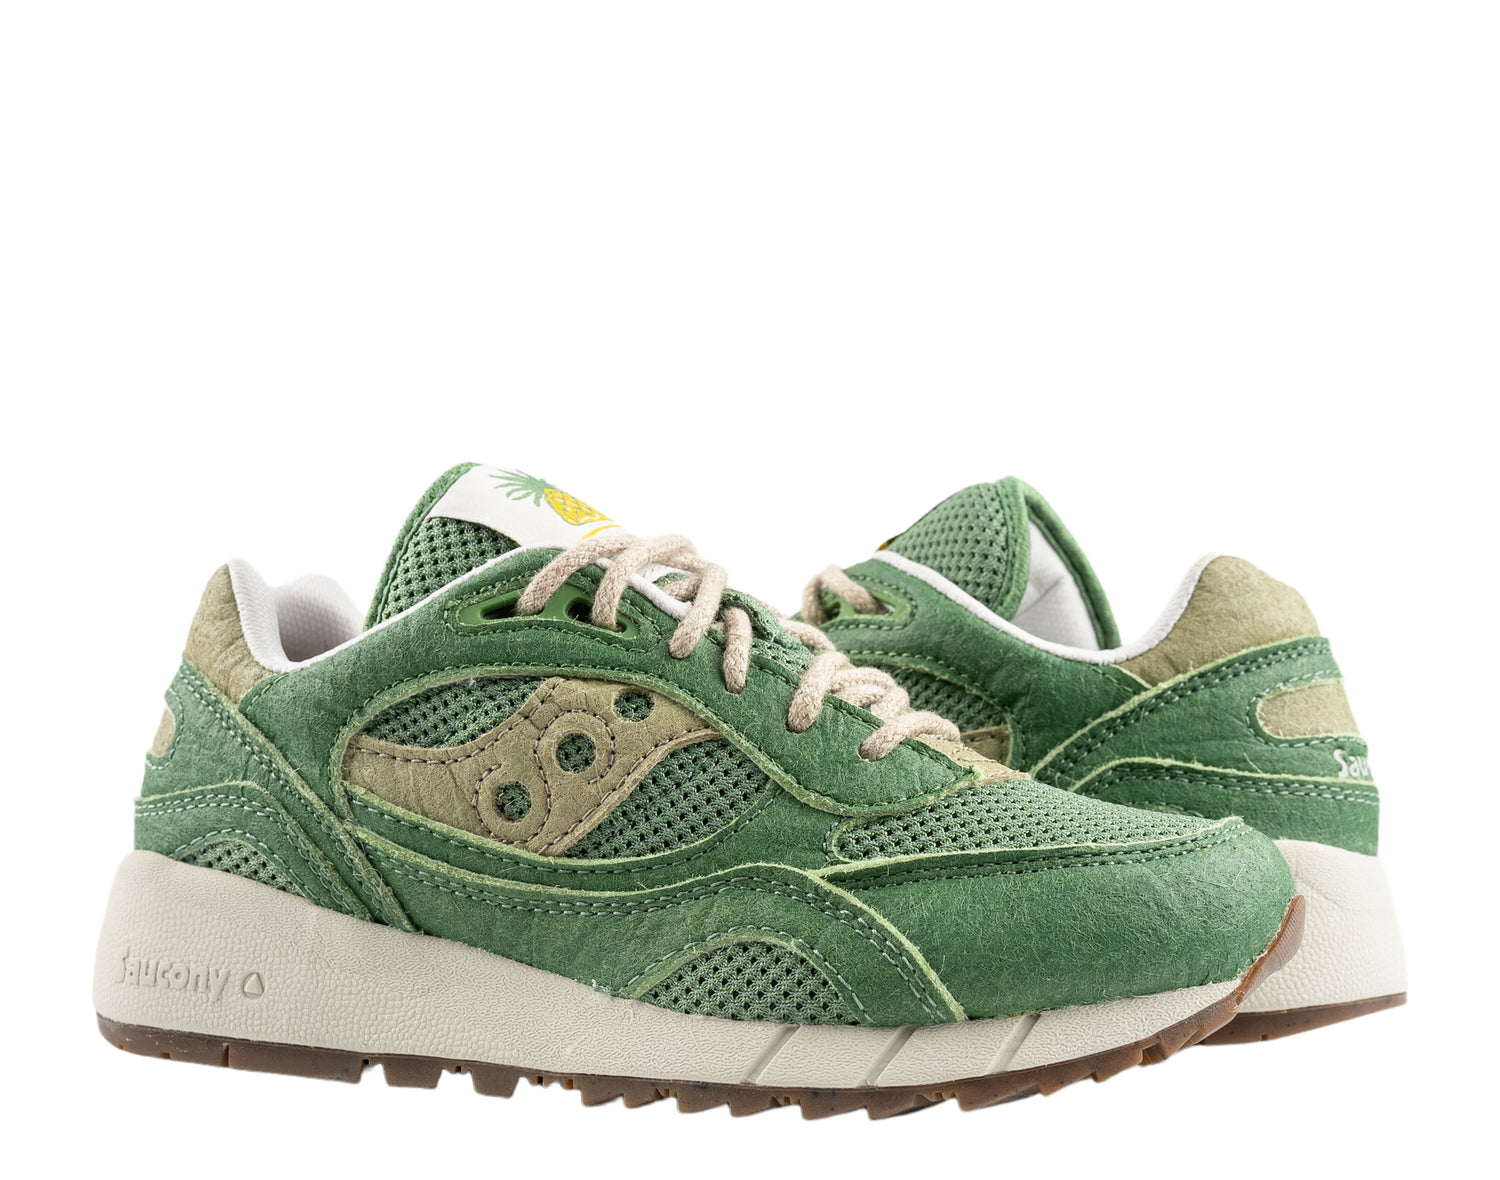 Saucony Originals Shadow 6000 - Earth Pack RFG - Running Shoes